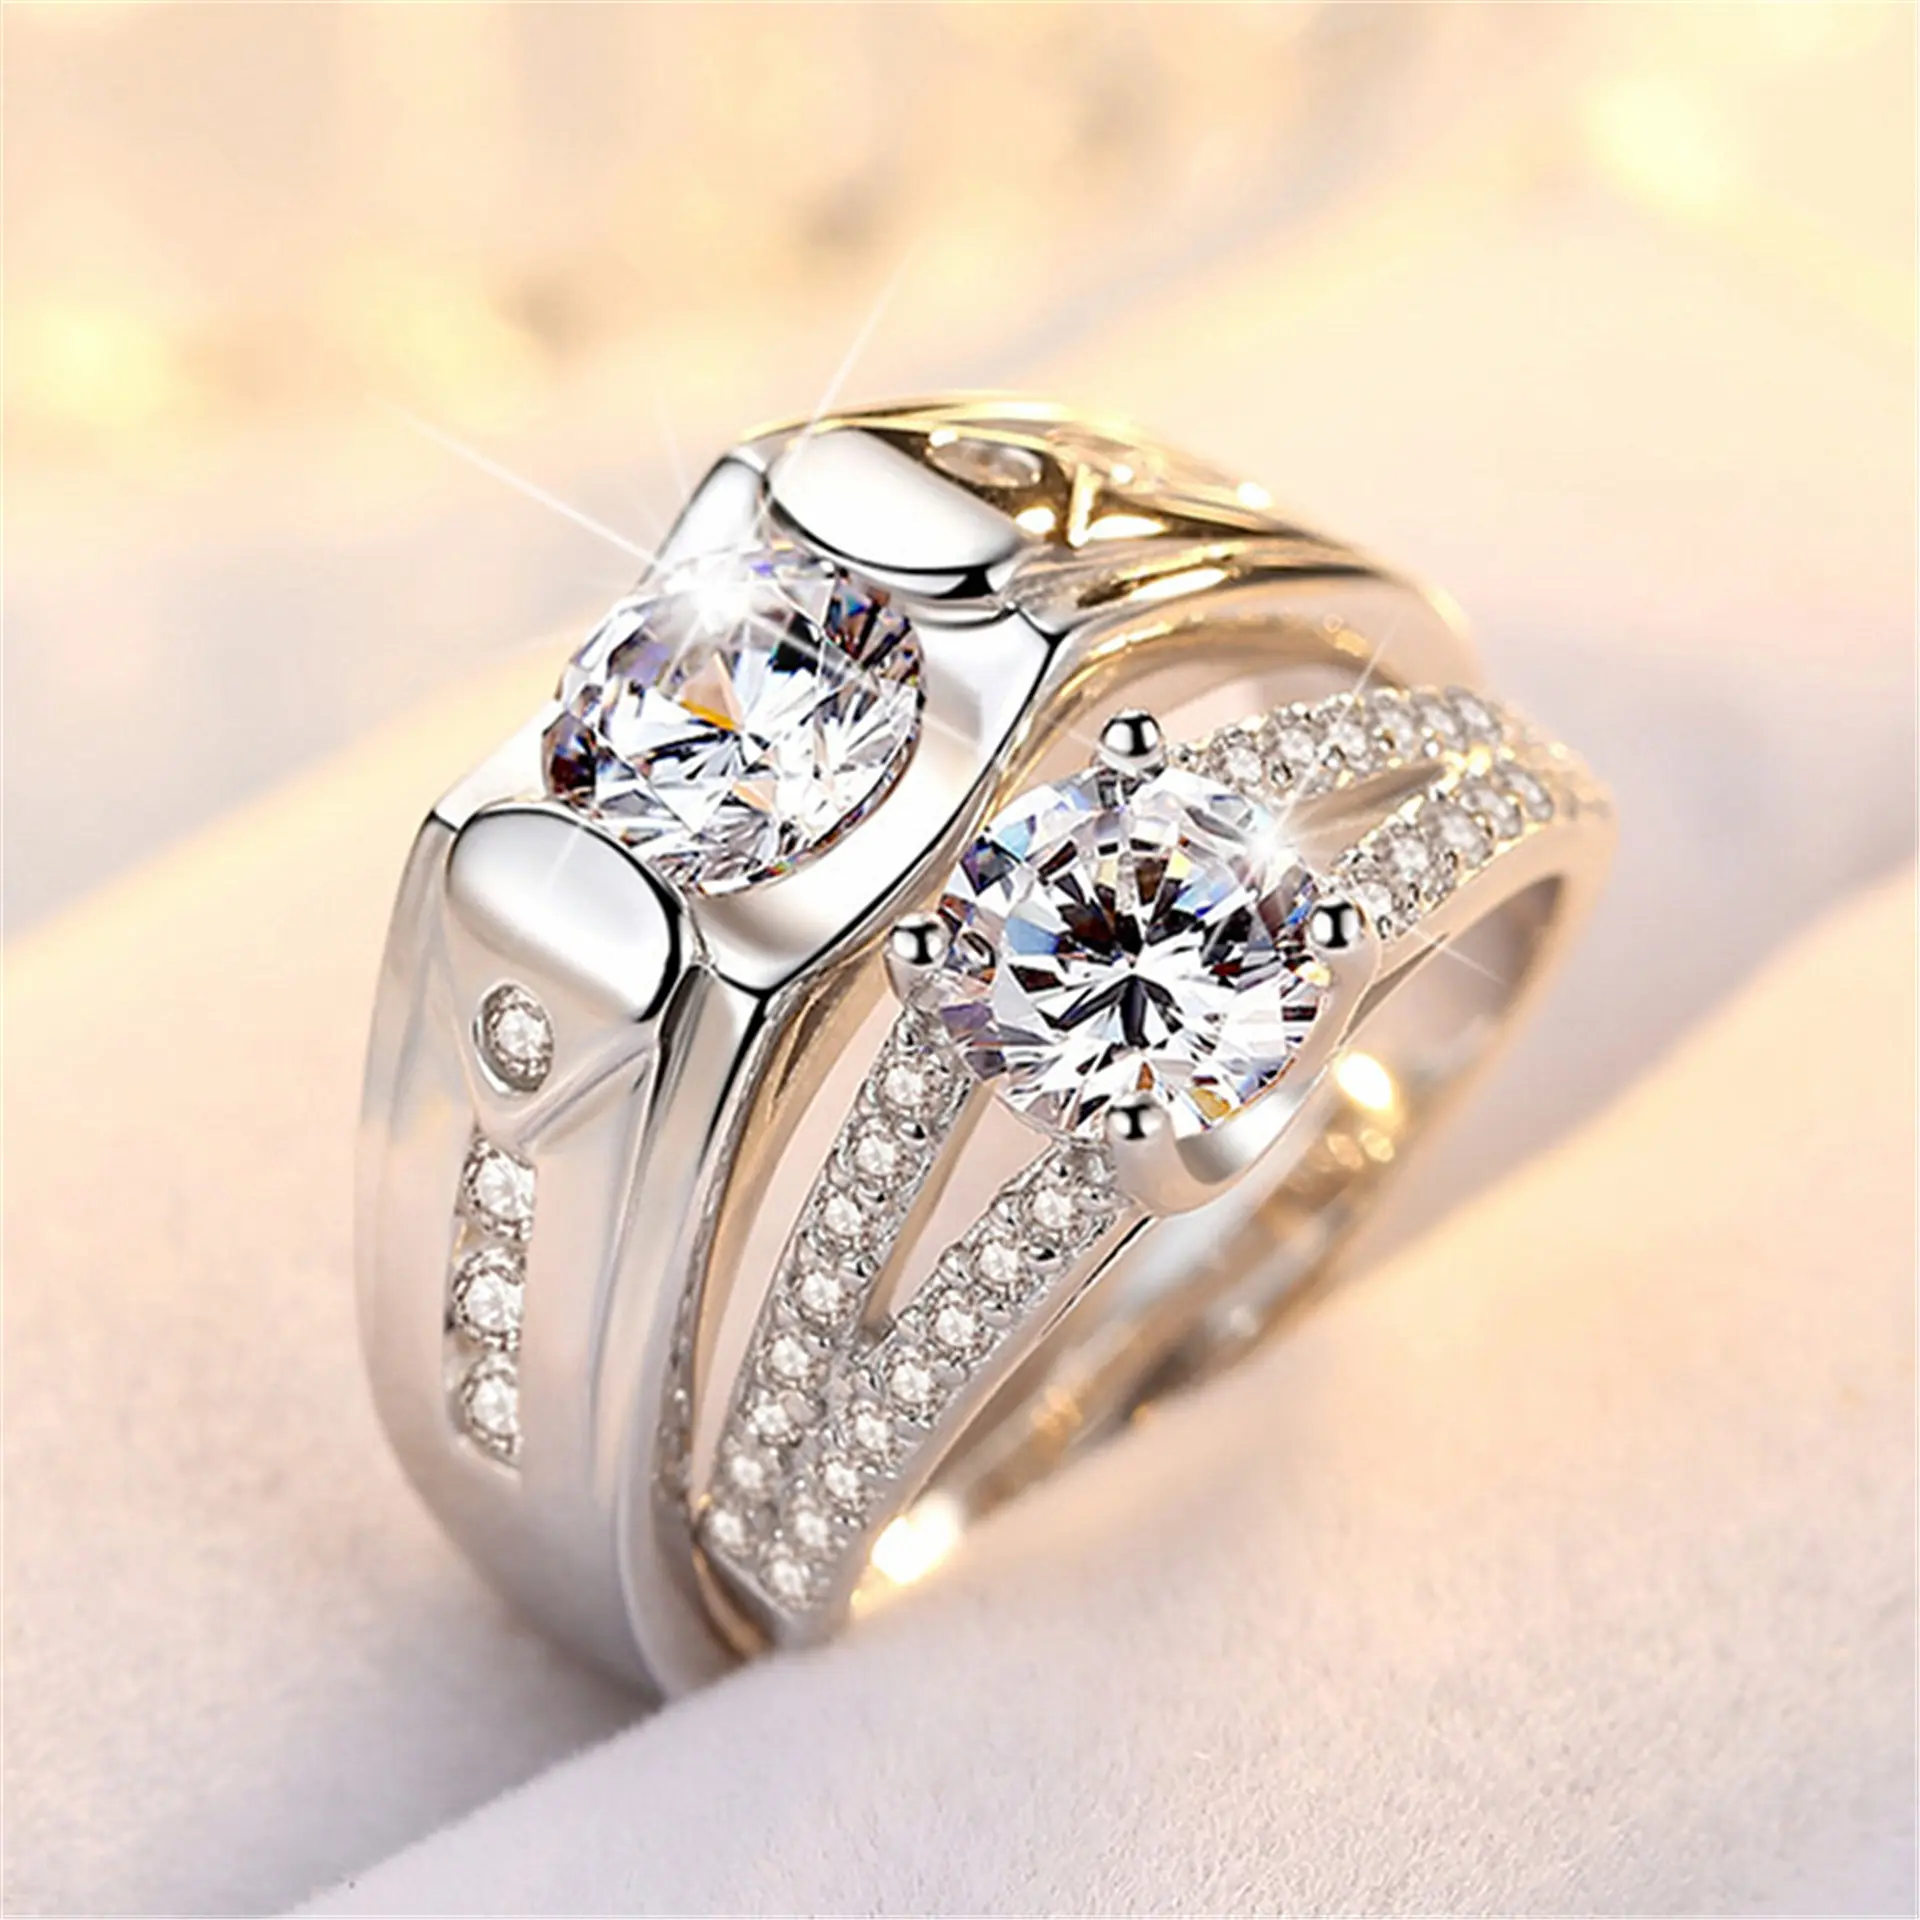 Fashion New Wedding Rings Copper Plated White Gold Rings Set Diamond Zircon Couple Rings